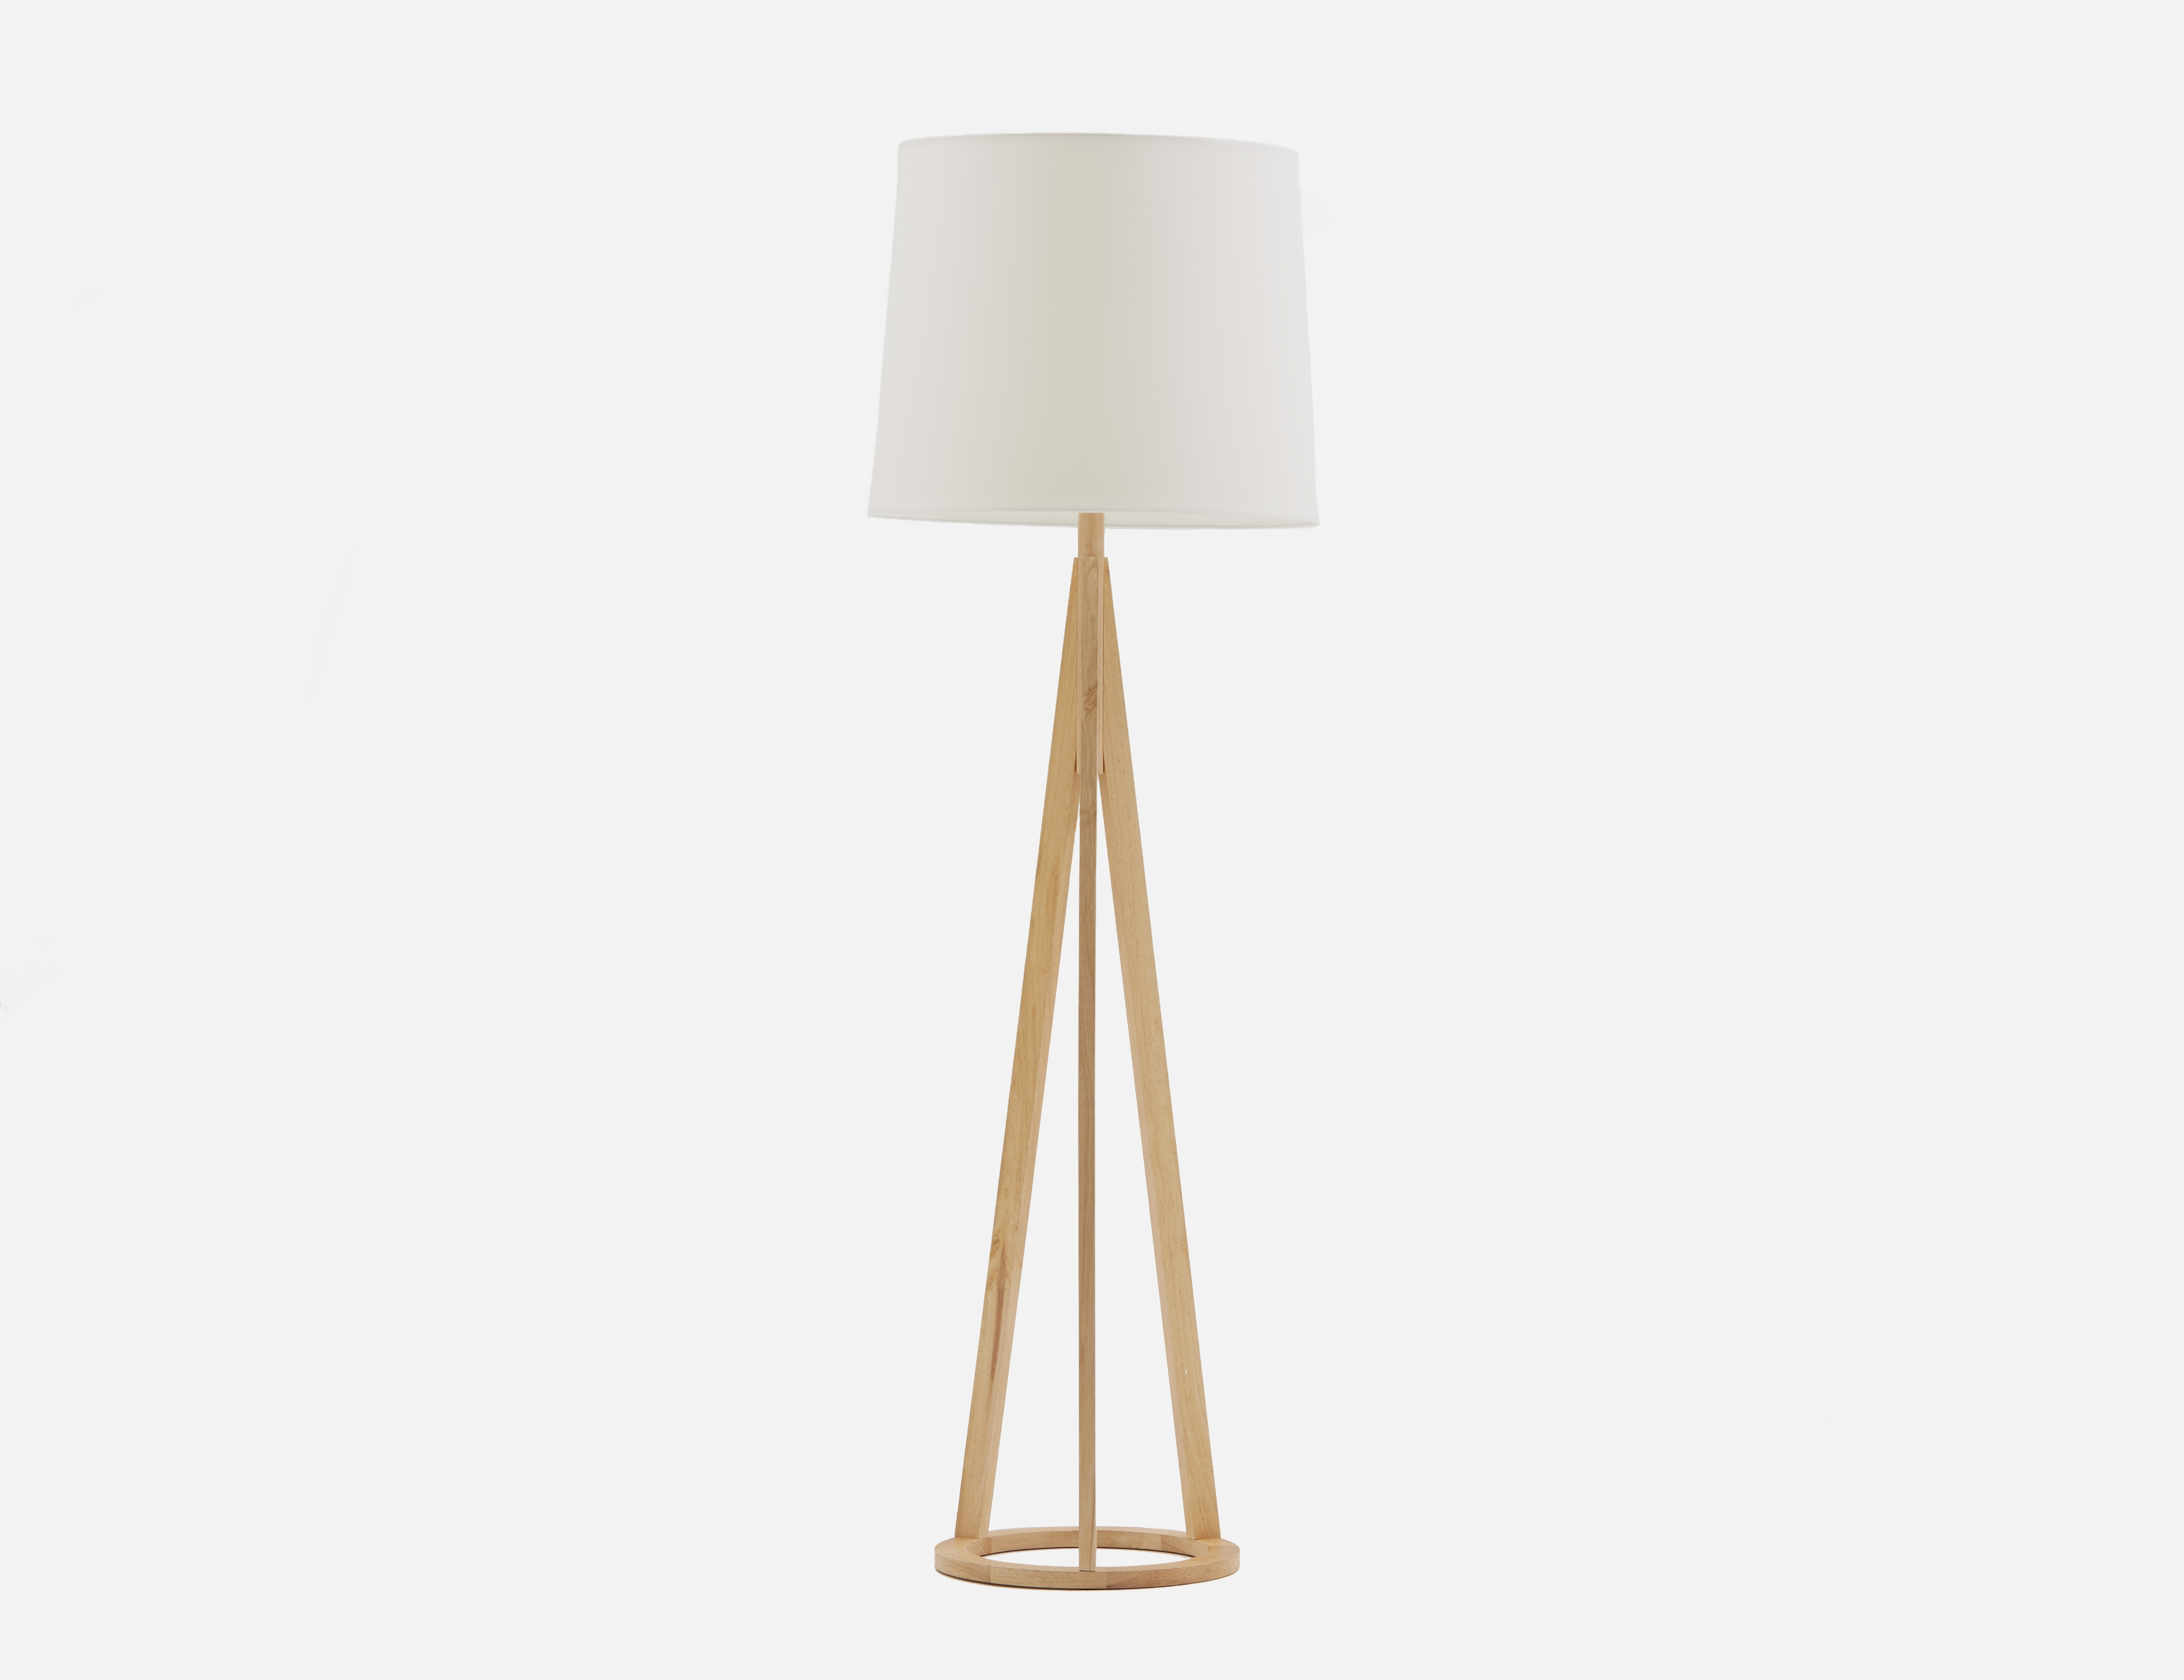 Bimini White And Natural Floor Lamp 160cm Height Structu throughout dimensions 4897 X 3767